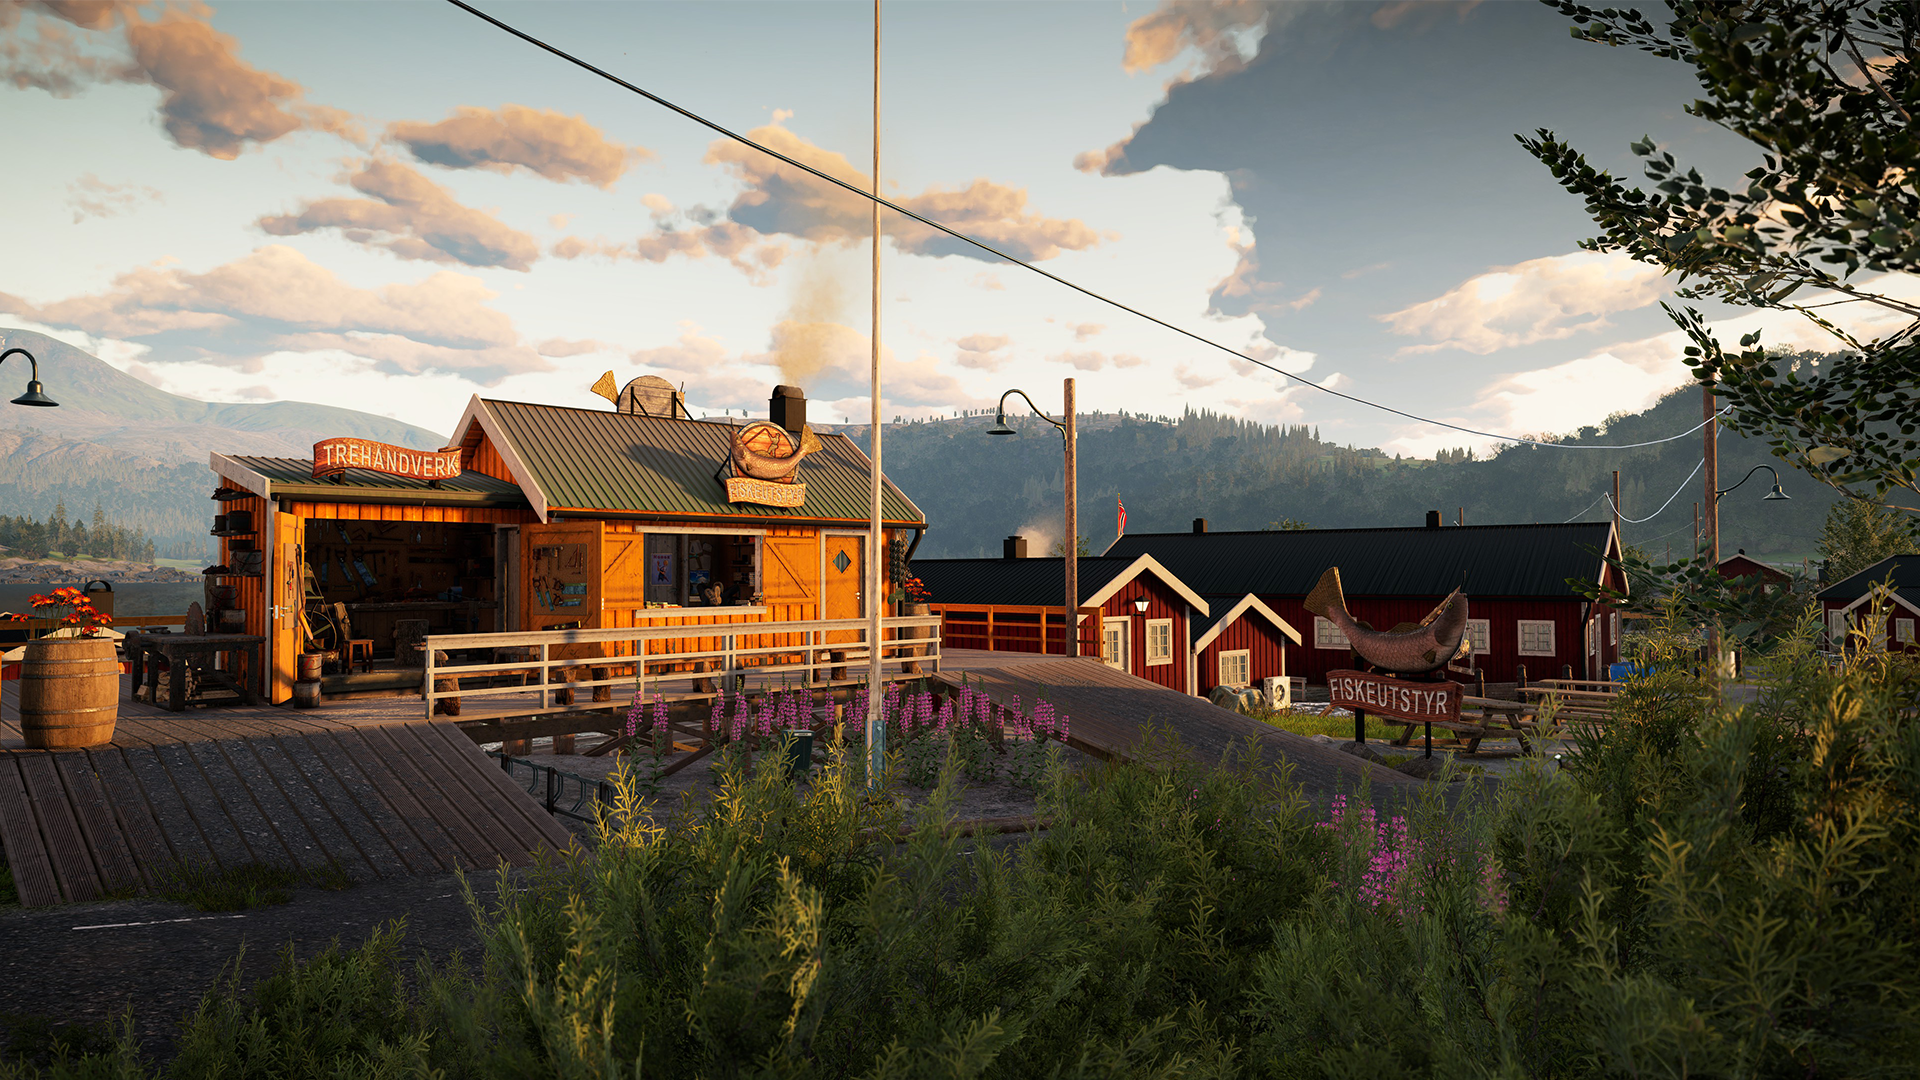 Image of the bait and tackle shop in the Norway Reserve at sunset.